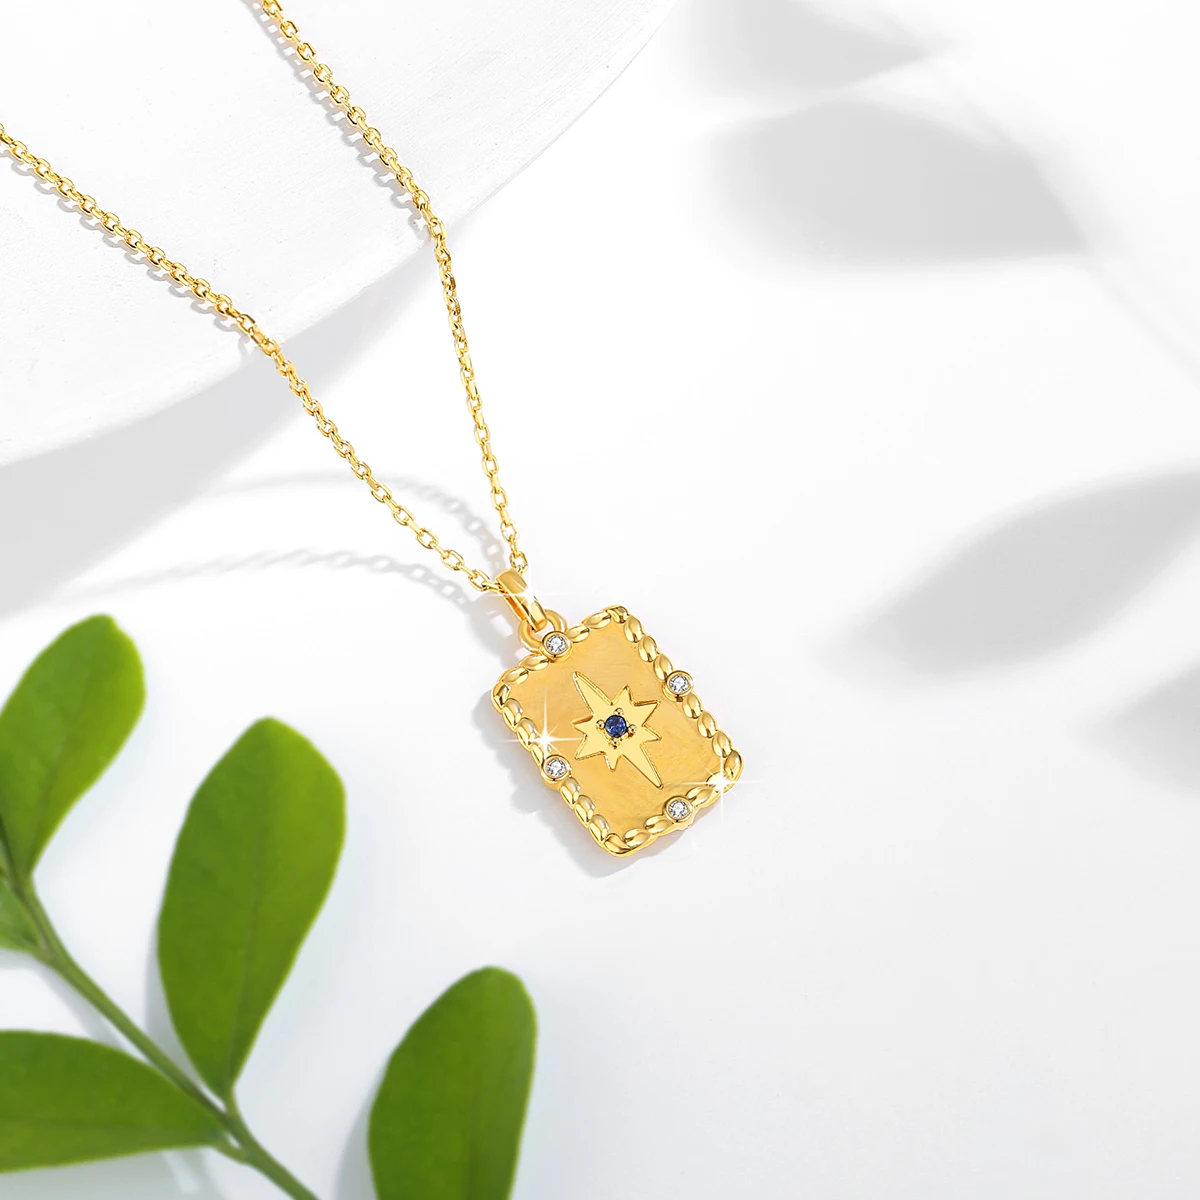 Real 18K Gold Red Corundum Pendant Necklaces for Women Anniversary Party Gift AU750 Bookmark Fine Jewelry With Certificate